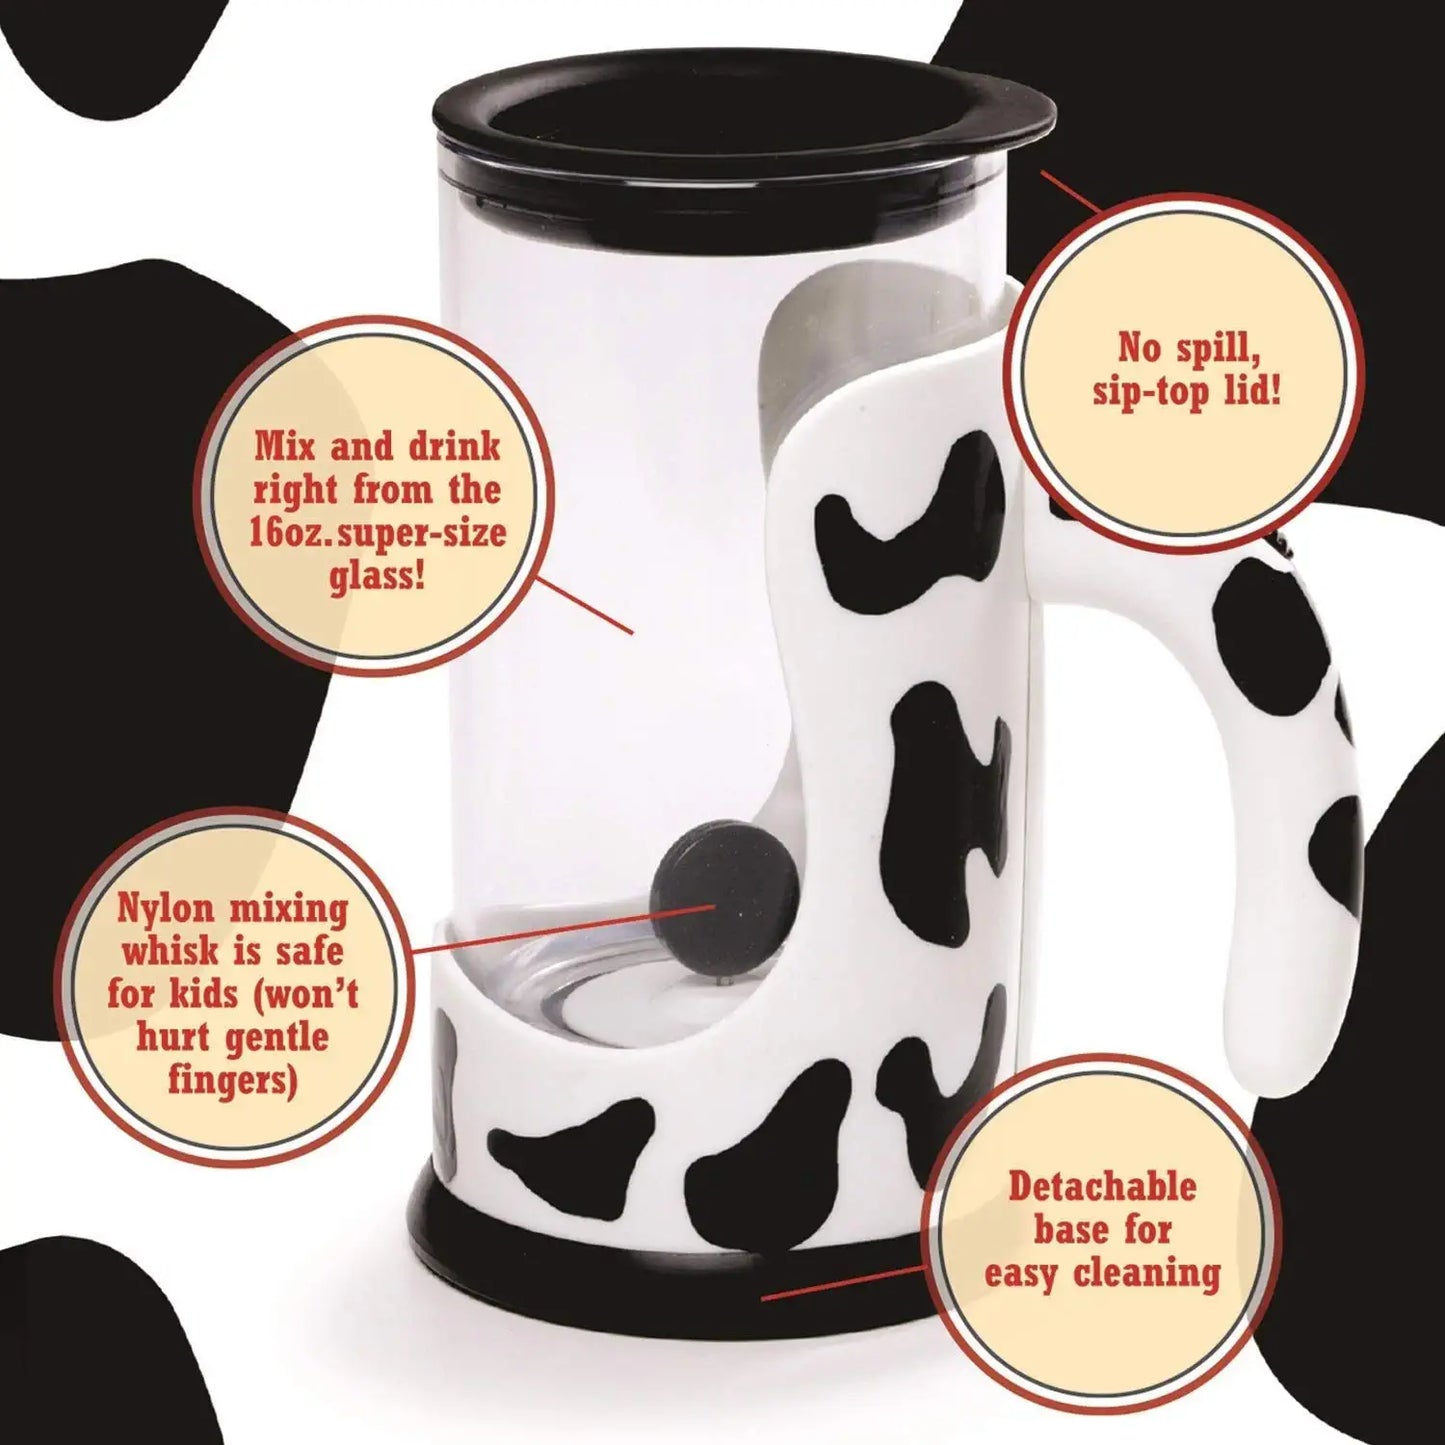 A chocolate milk mixing cup with text mentioning all the features of the cup.